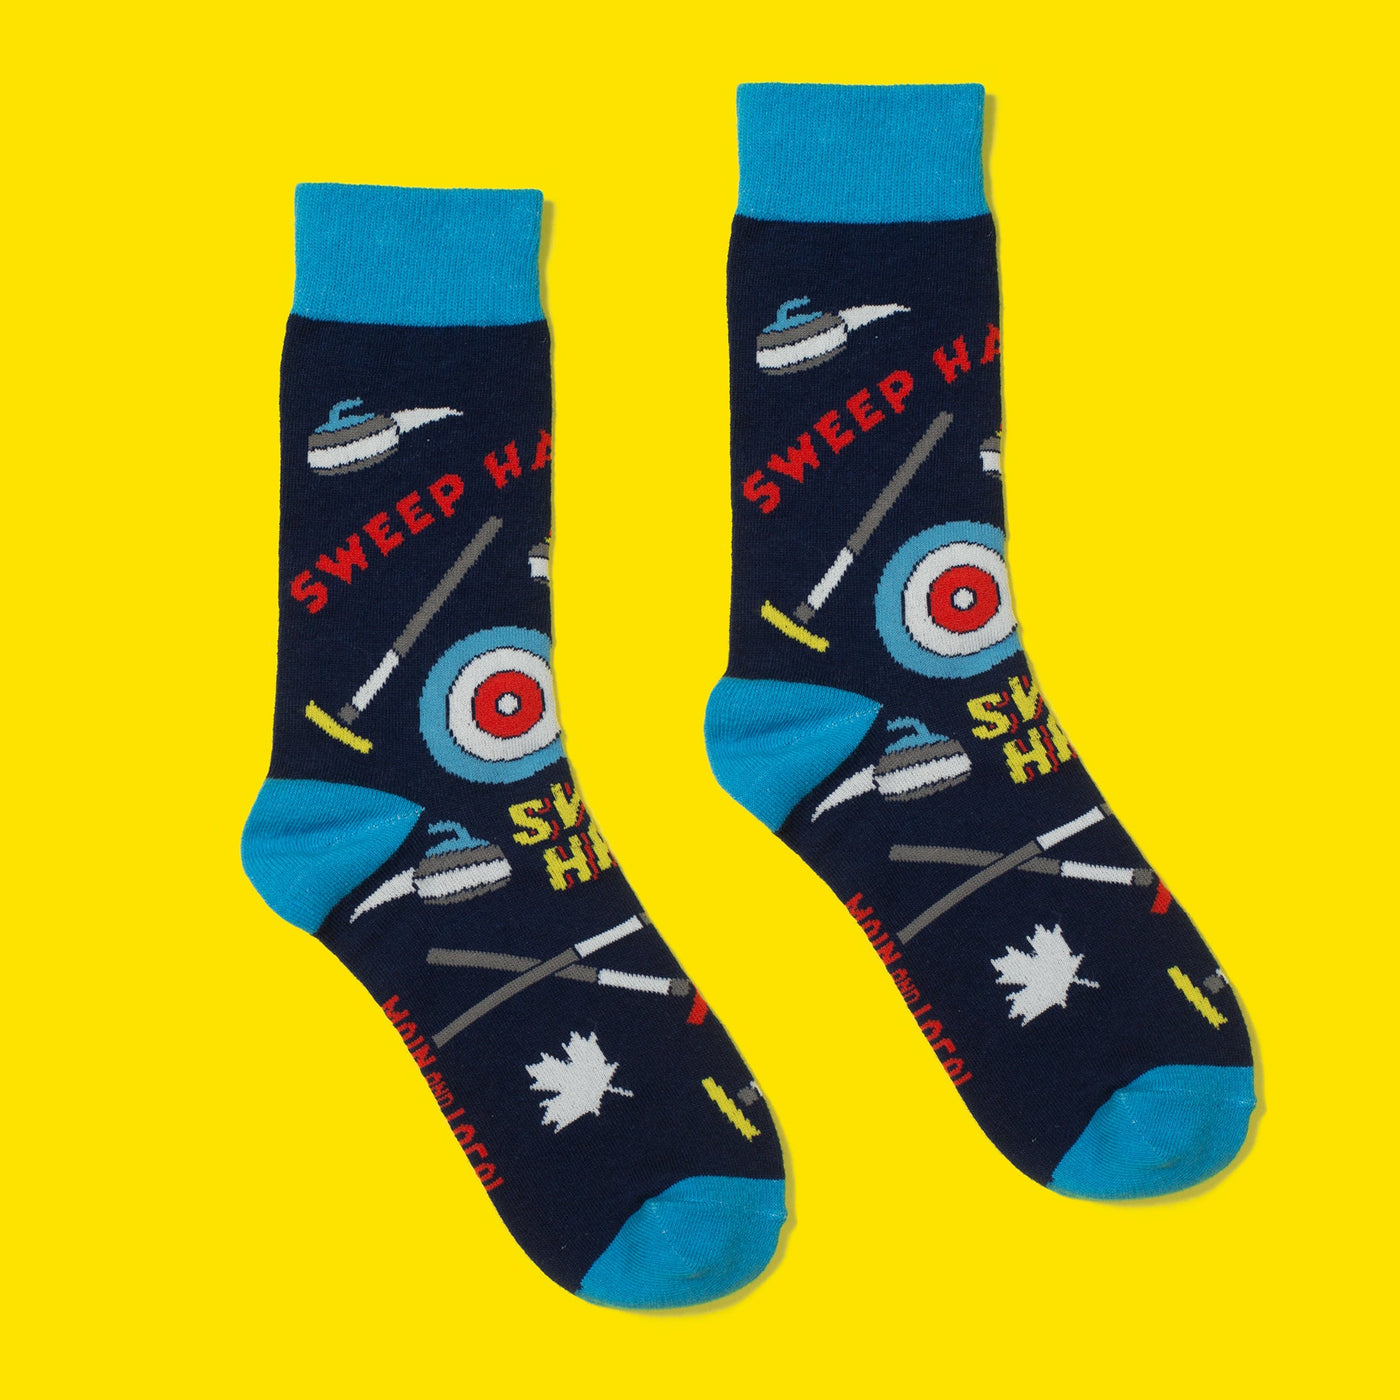 "Canadian Curling" Cotton Crew Socks by Main & Local